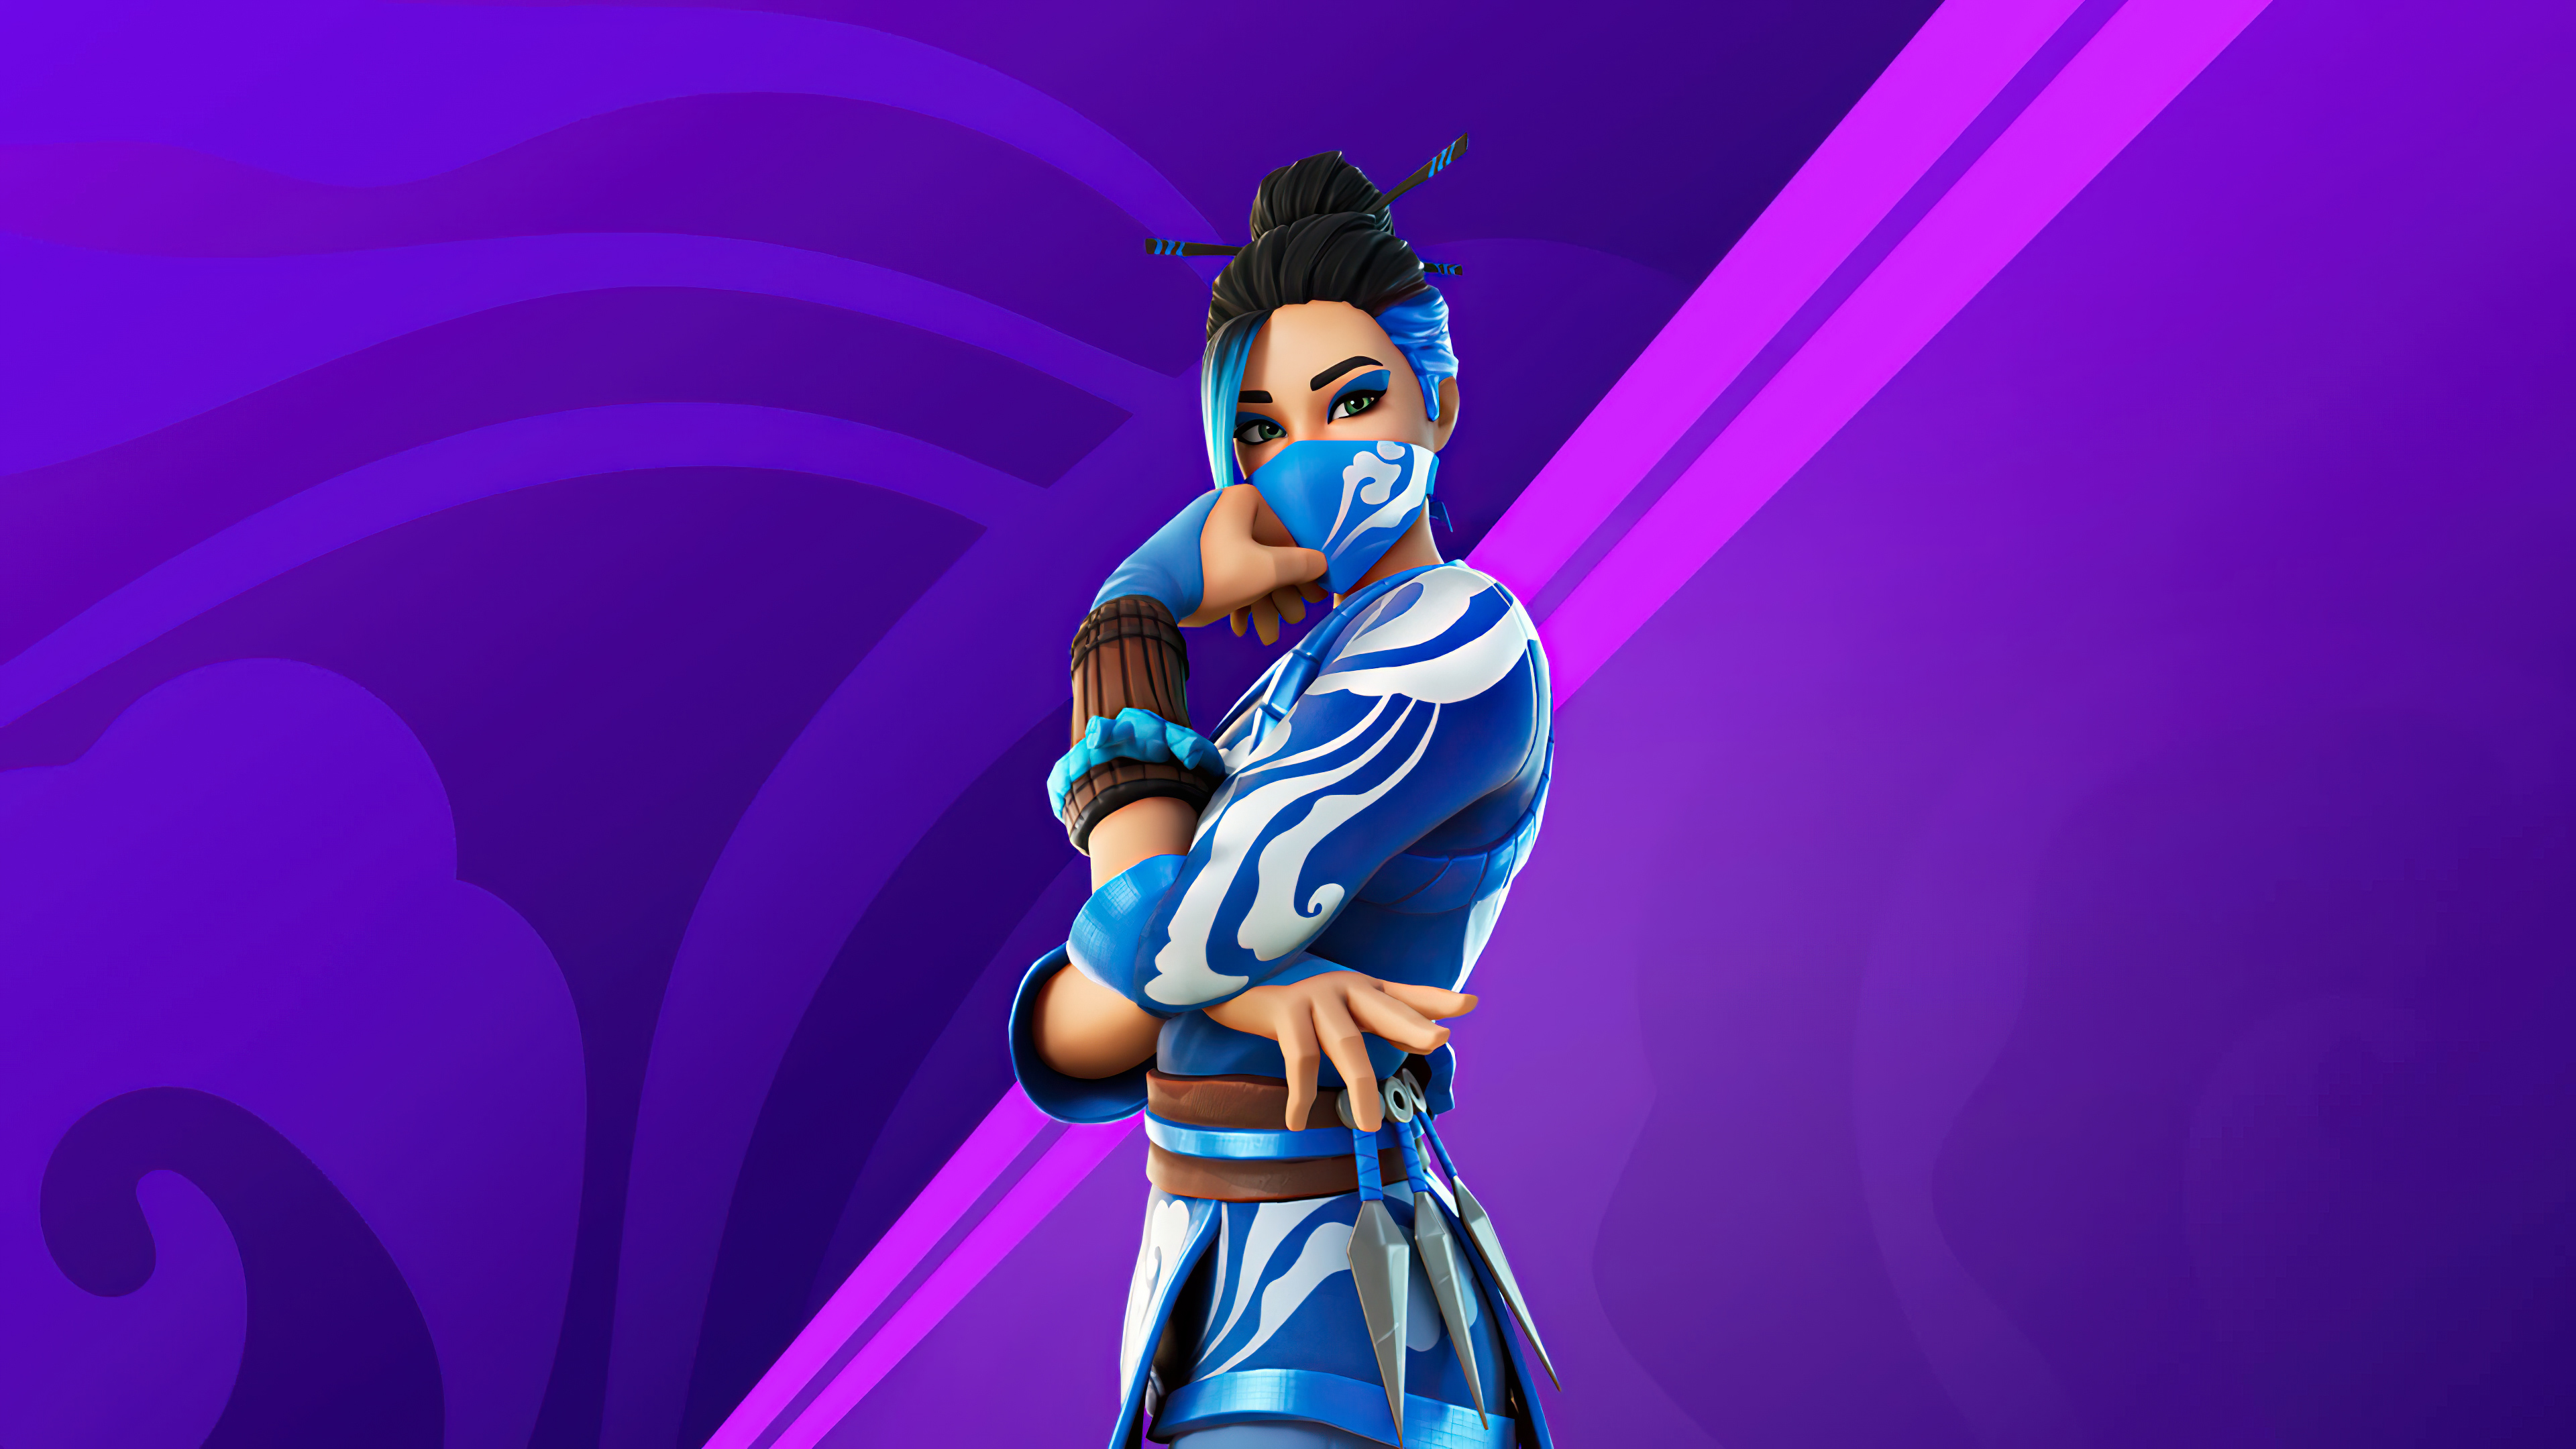 Fortnite HD Wallpapers and Backgrounds. 